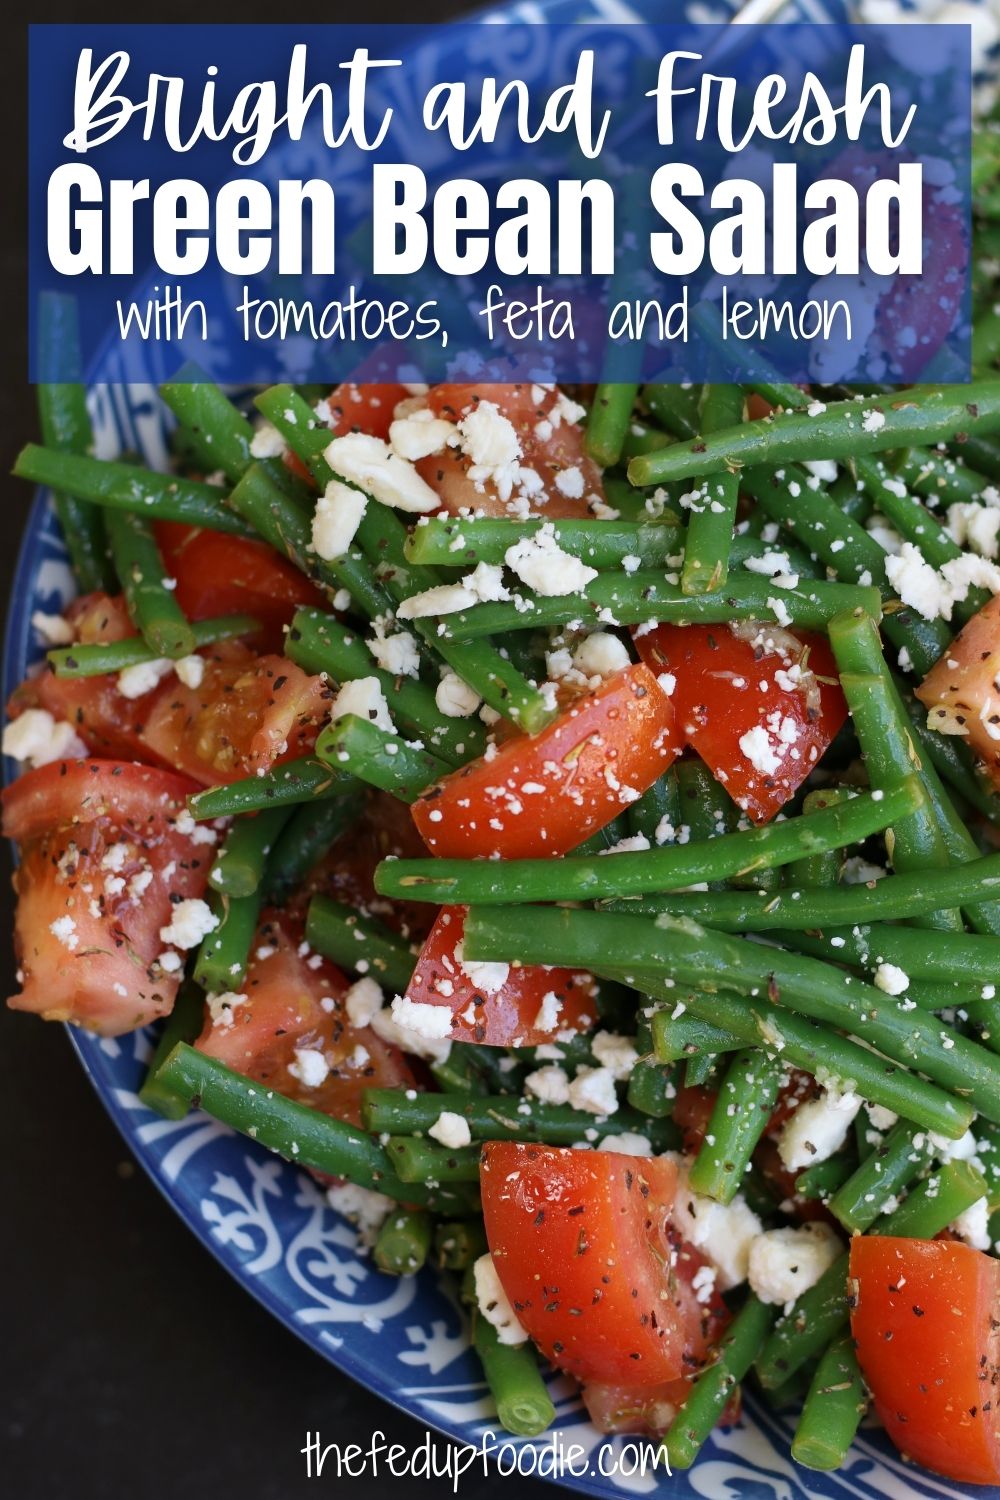 Green Bean and Tomato Salad uses fresh green beans, lemon and thyme to make a quick and easy cold salad that tastes great along side many main dishes. A side dish that makes eating healthy fun and satisfying.
#GreenBeanSalad #GreenBeanSideDish #GreenbeanSalad #StringBeanSalad #FreshGreenBeanRecipeHealthy #GreenBeanSaladRecipesCold #GreenBeanWithTomatoes #EasyGreenBeanRecipes 